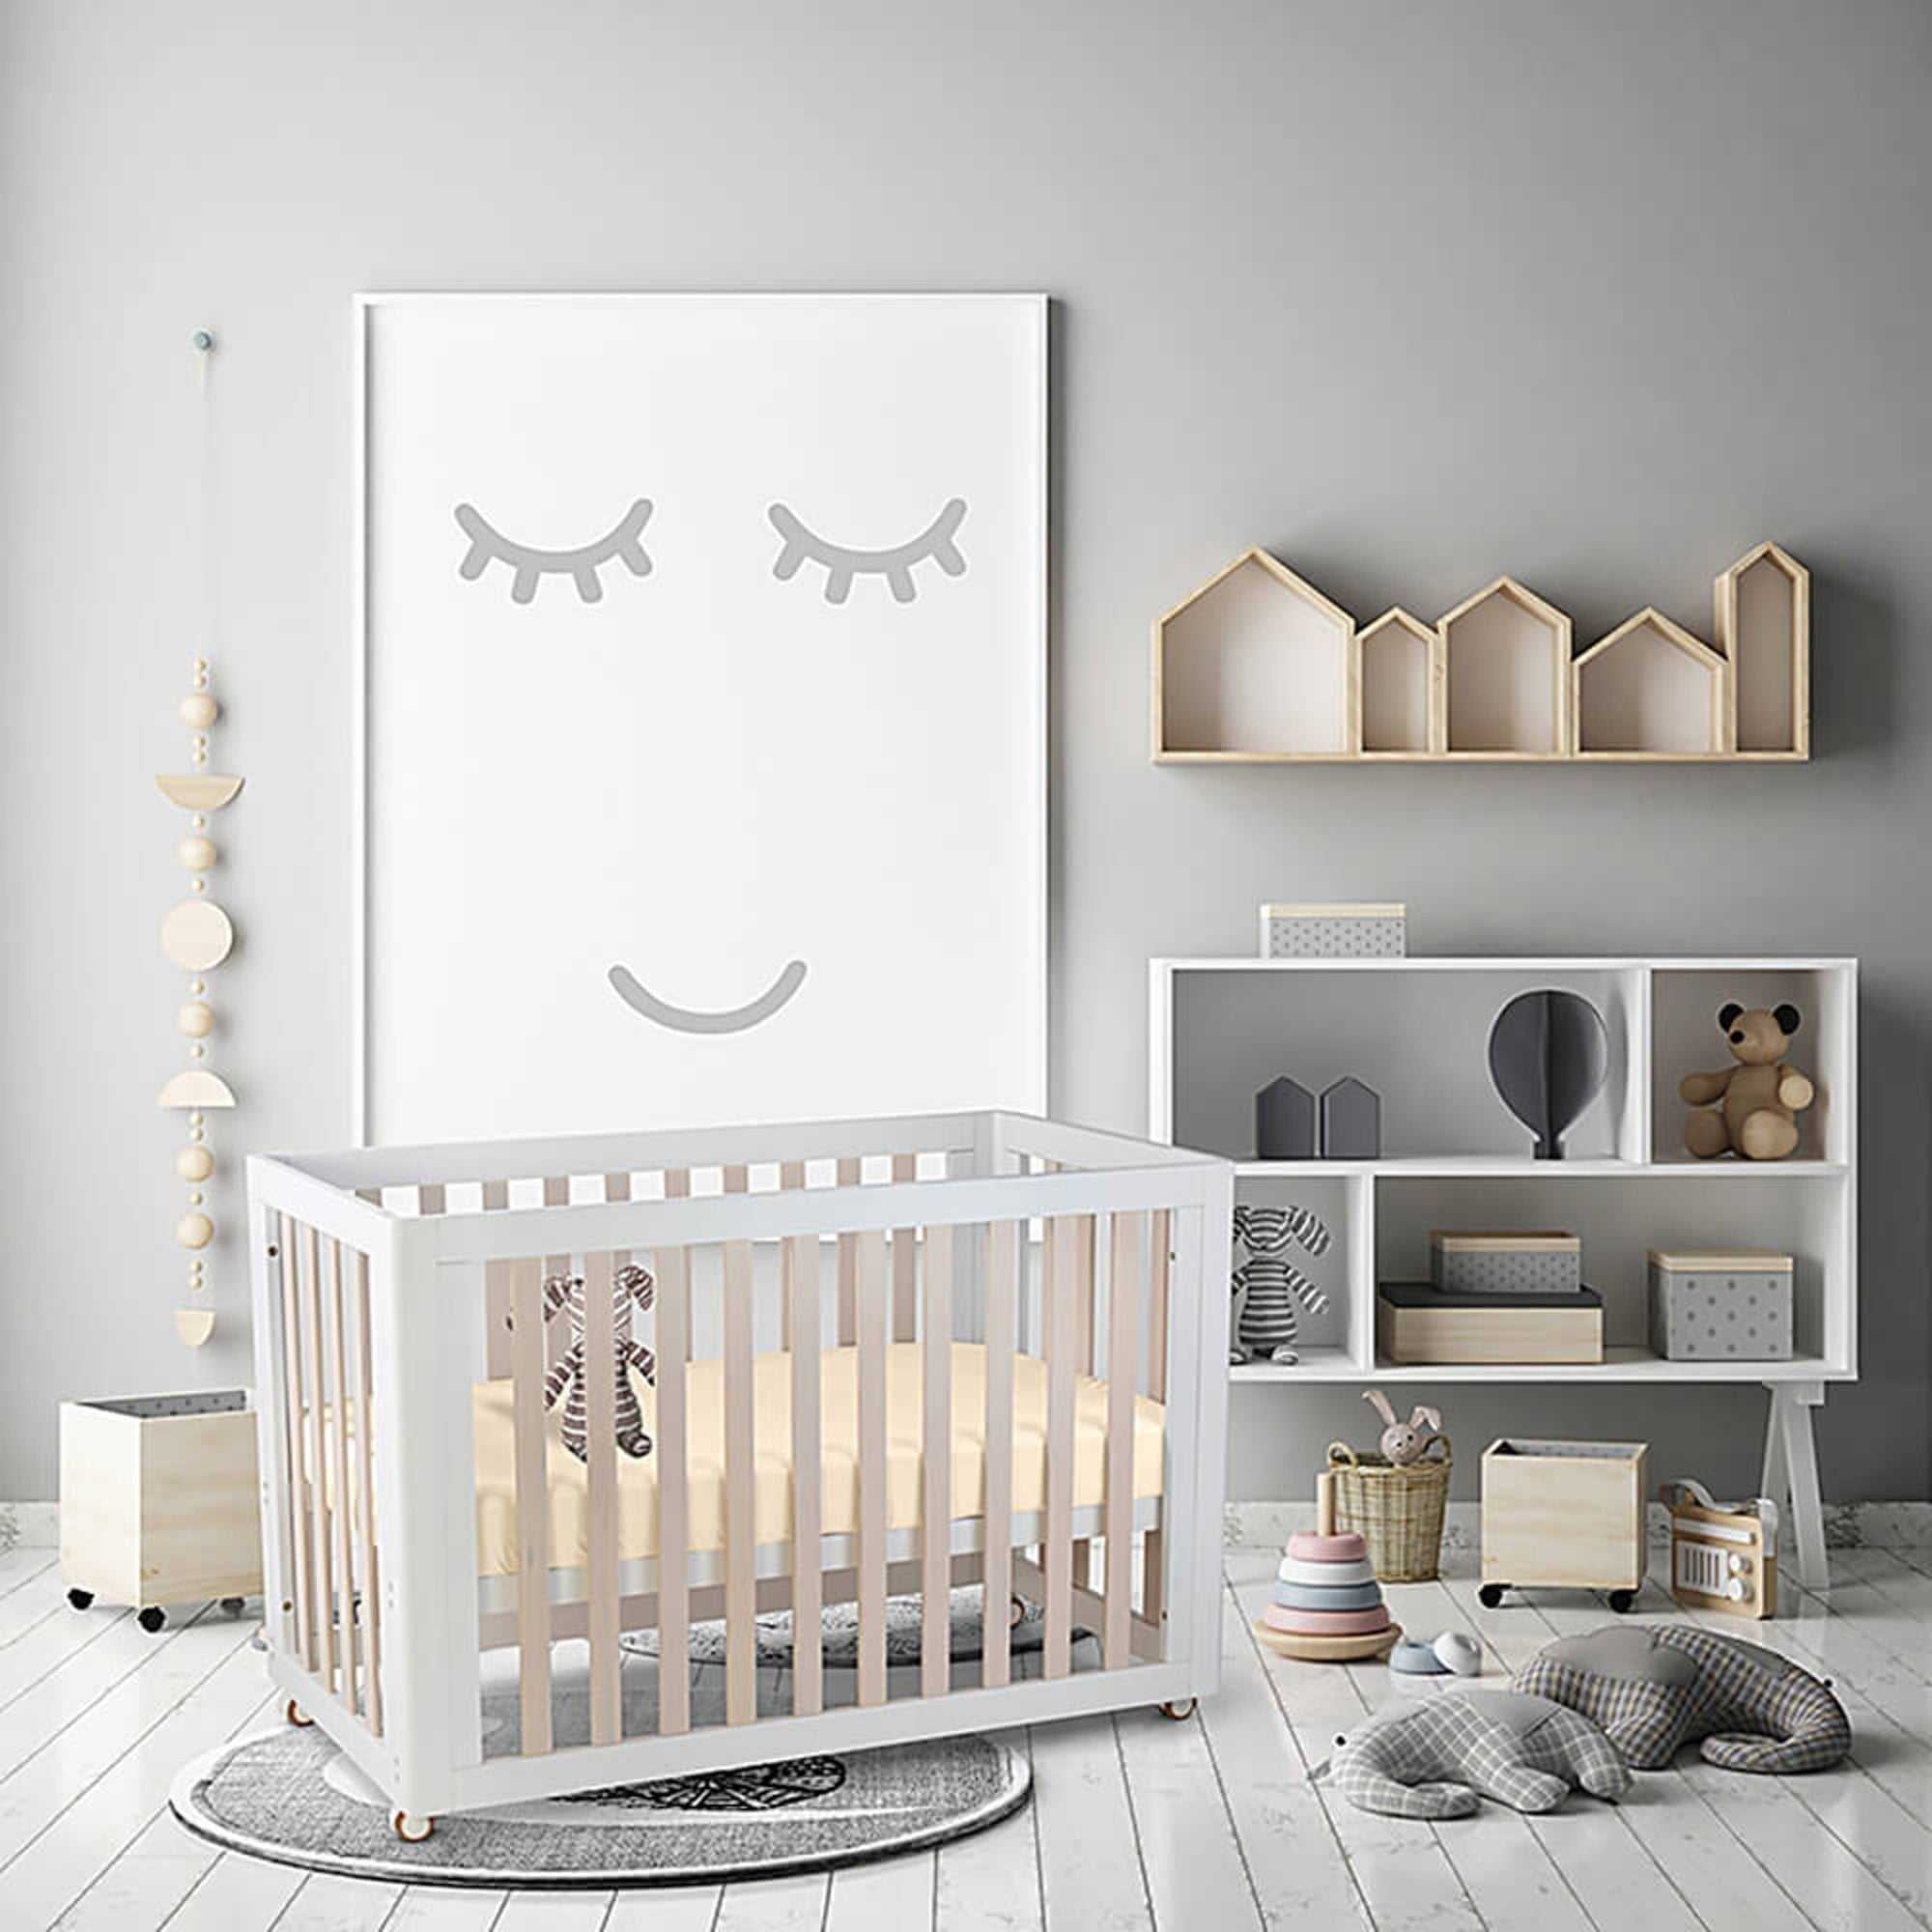 Cocoon Piccolo Compact Cot with Mattress